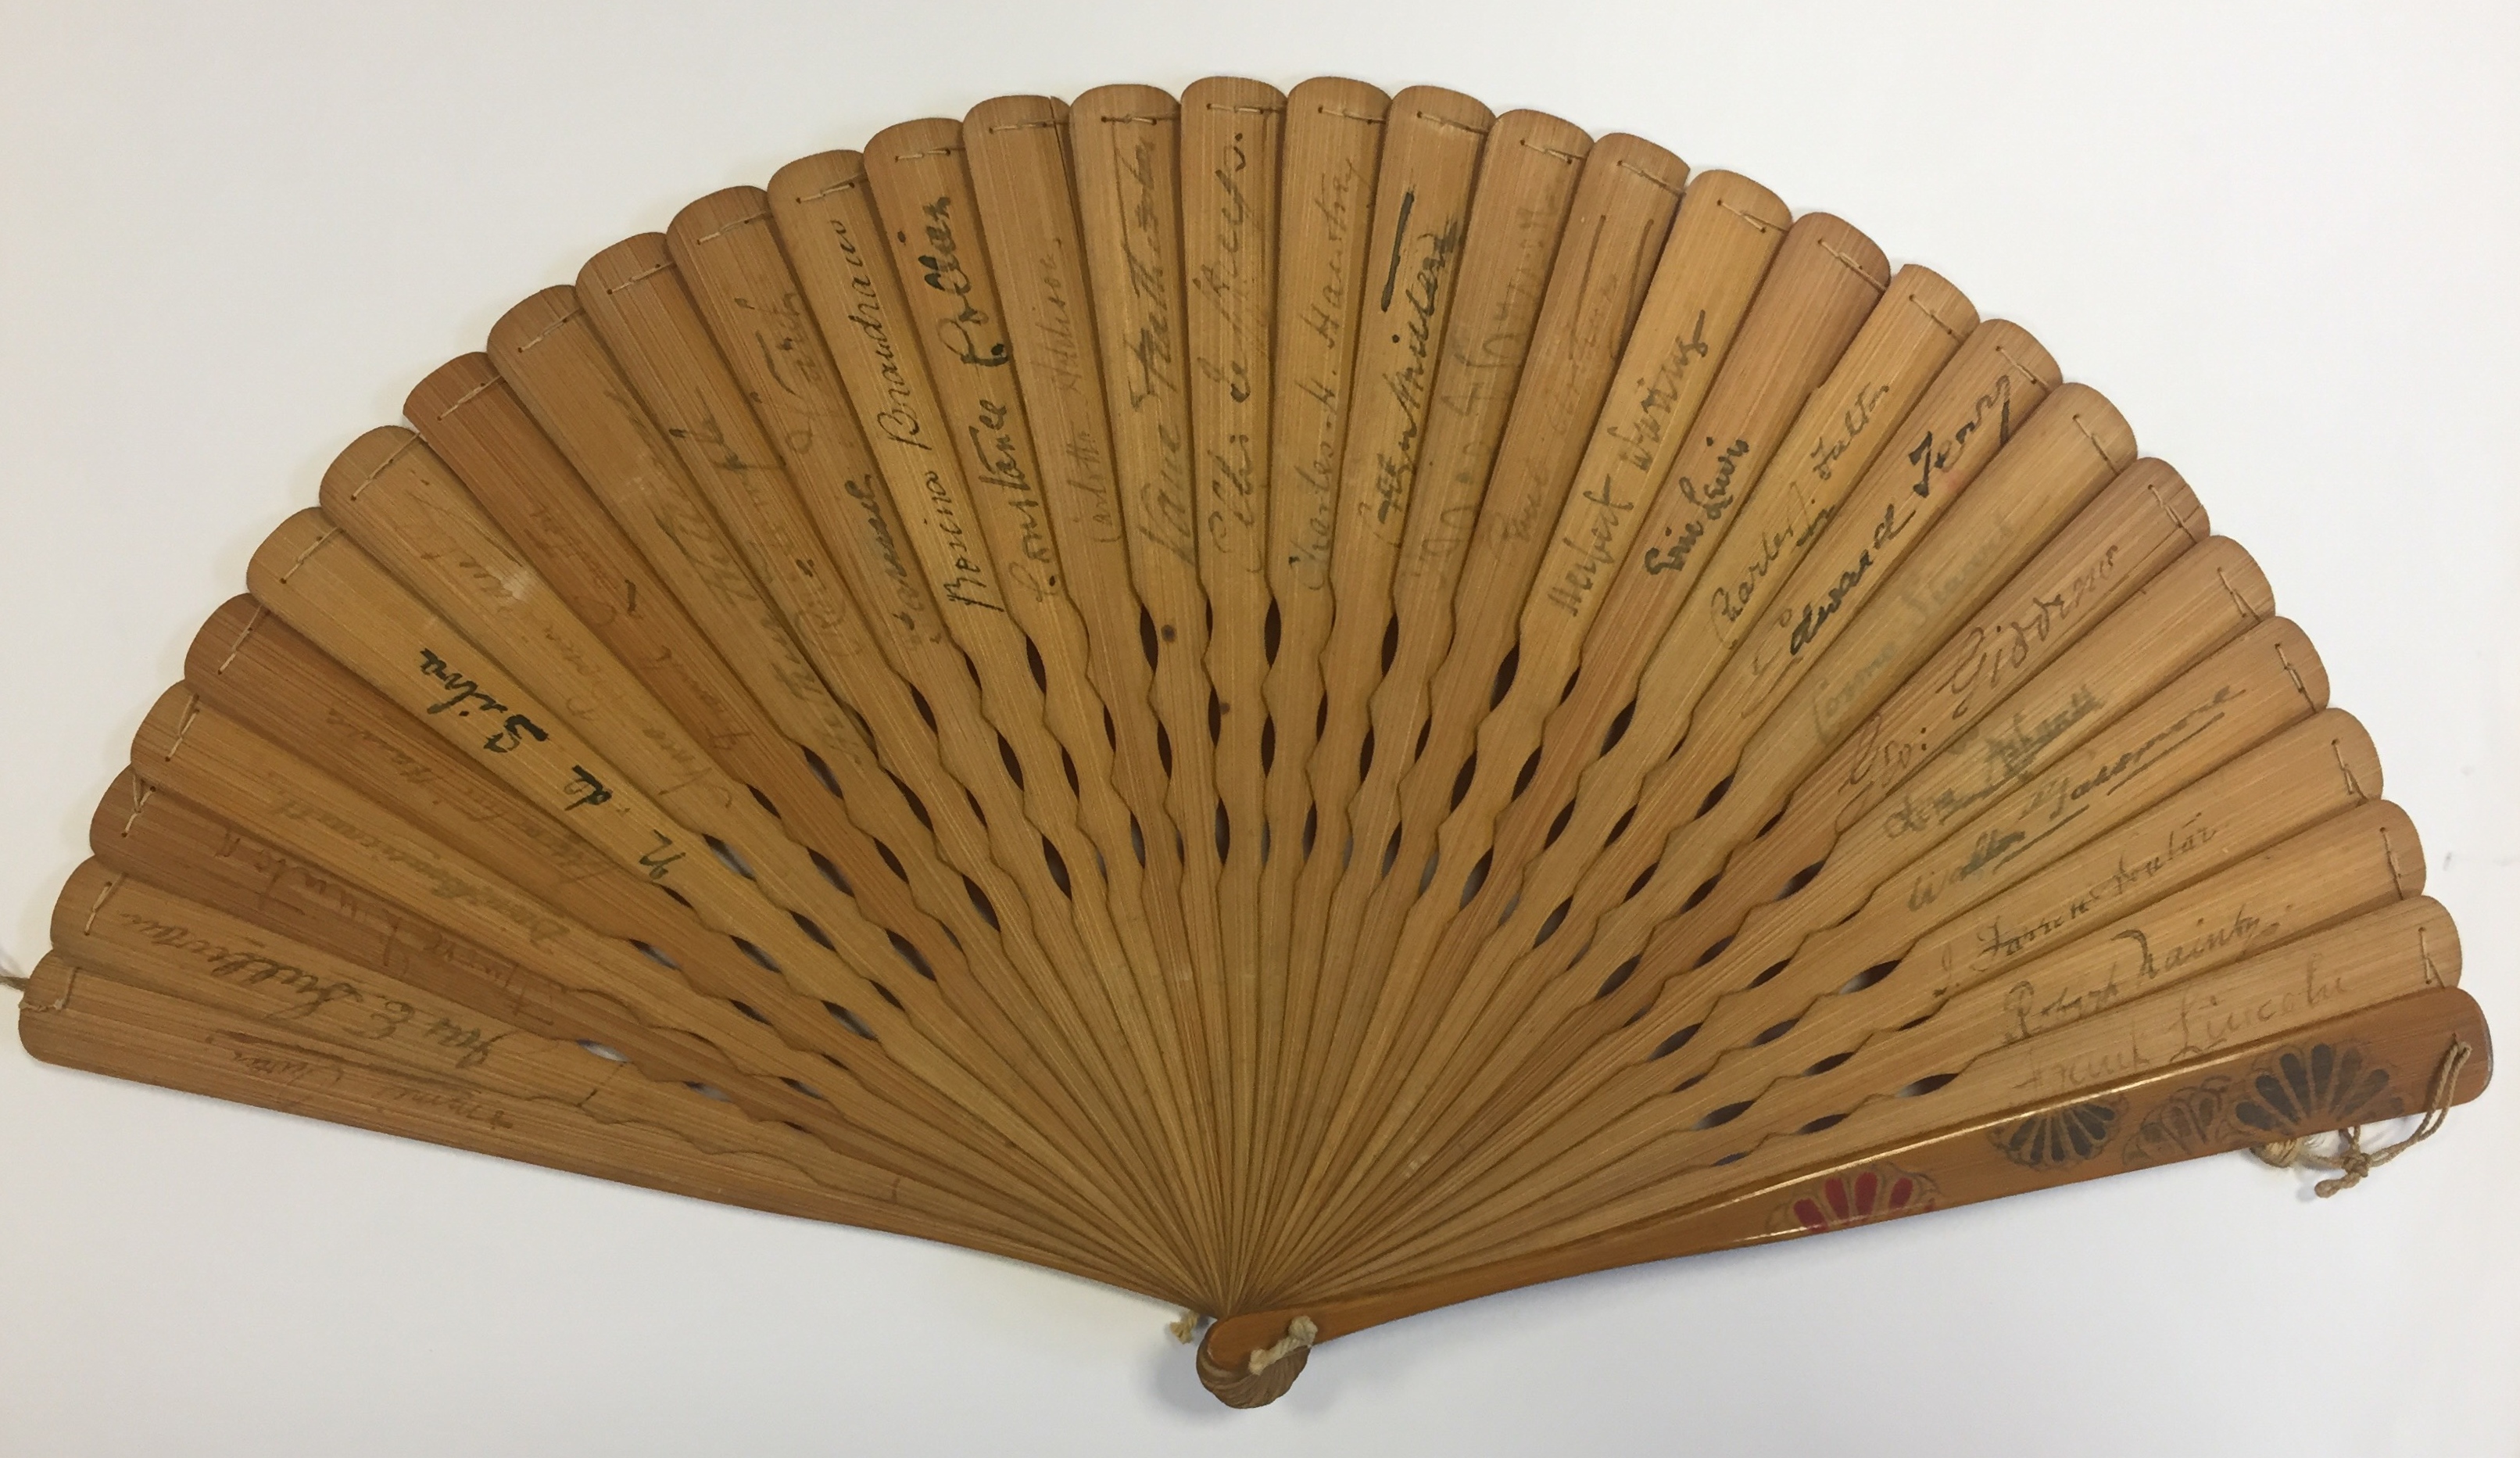 THEATRE: A wooden handheld fan featuring a painted decoration of several Japanese ladies in